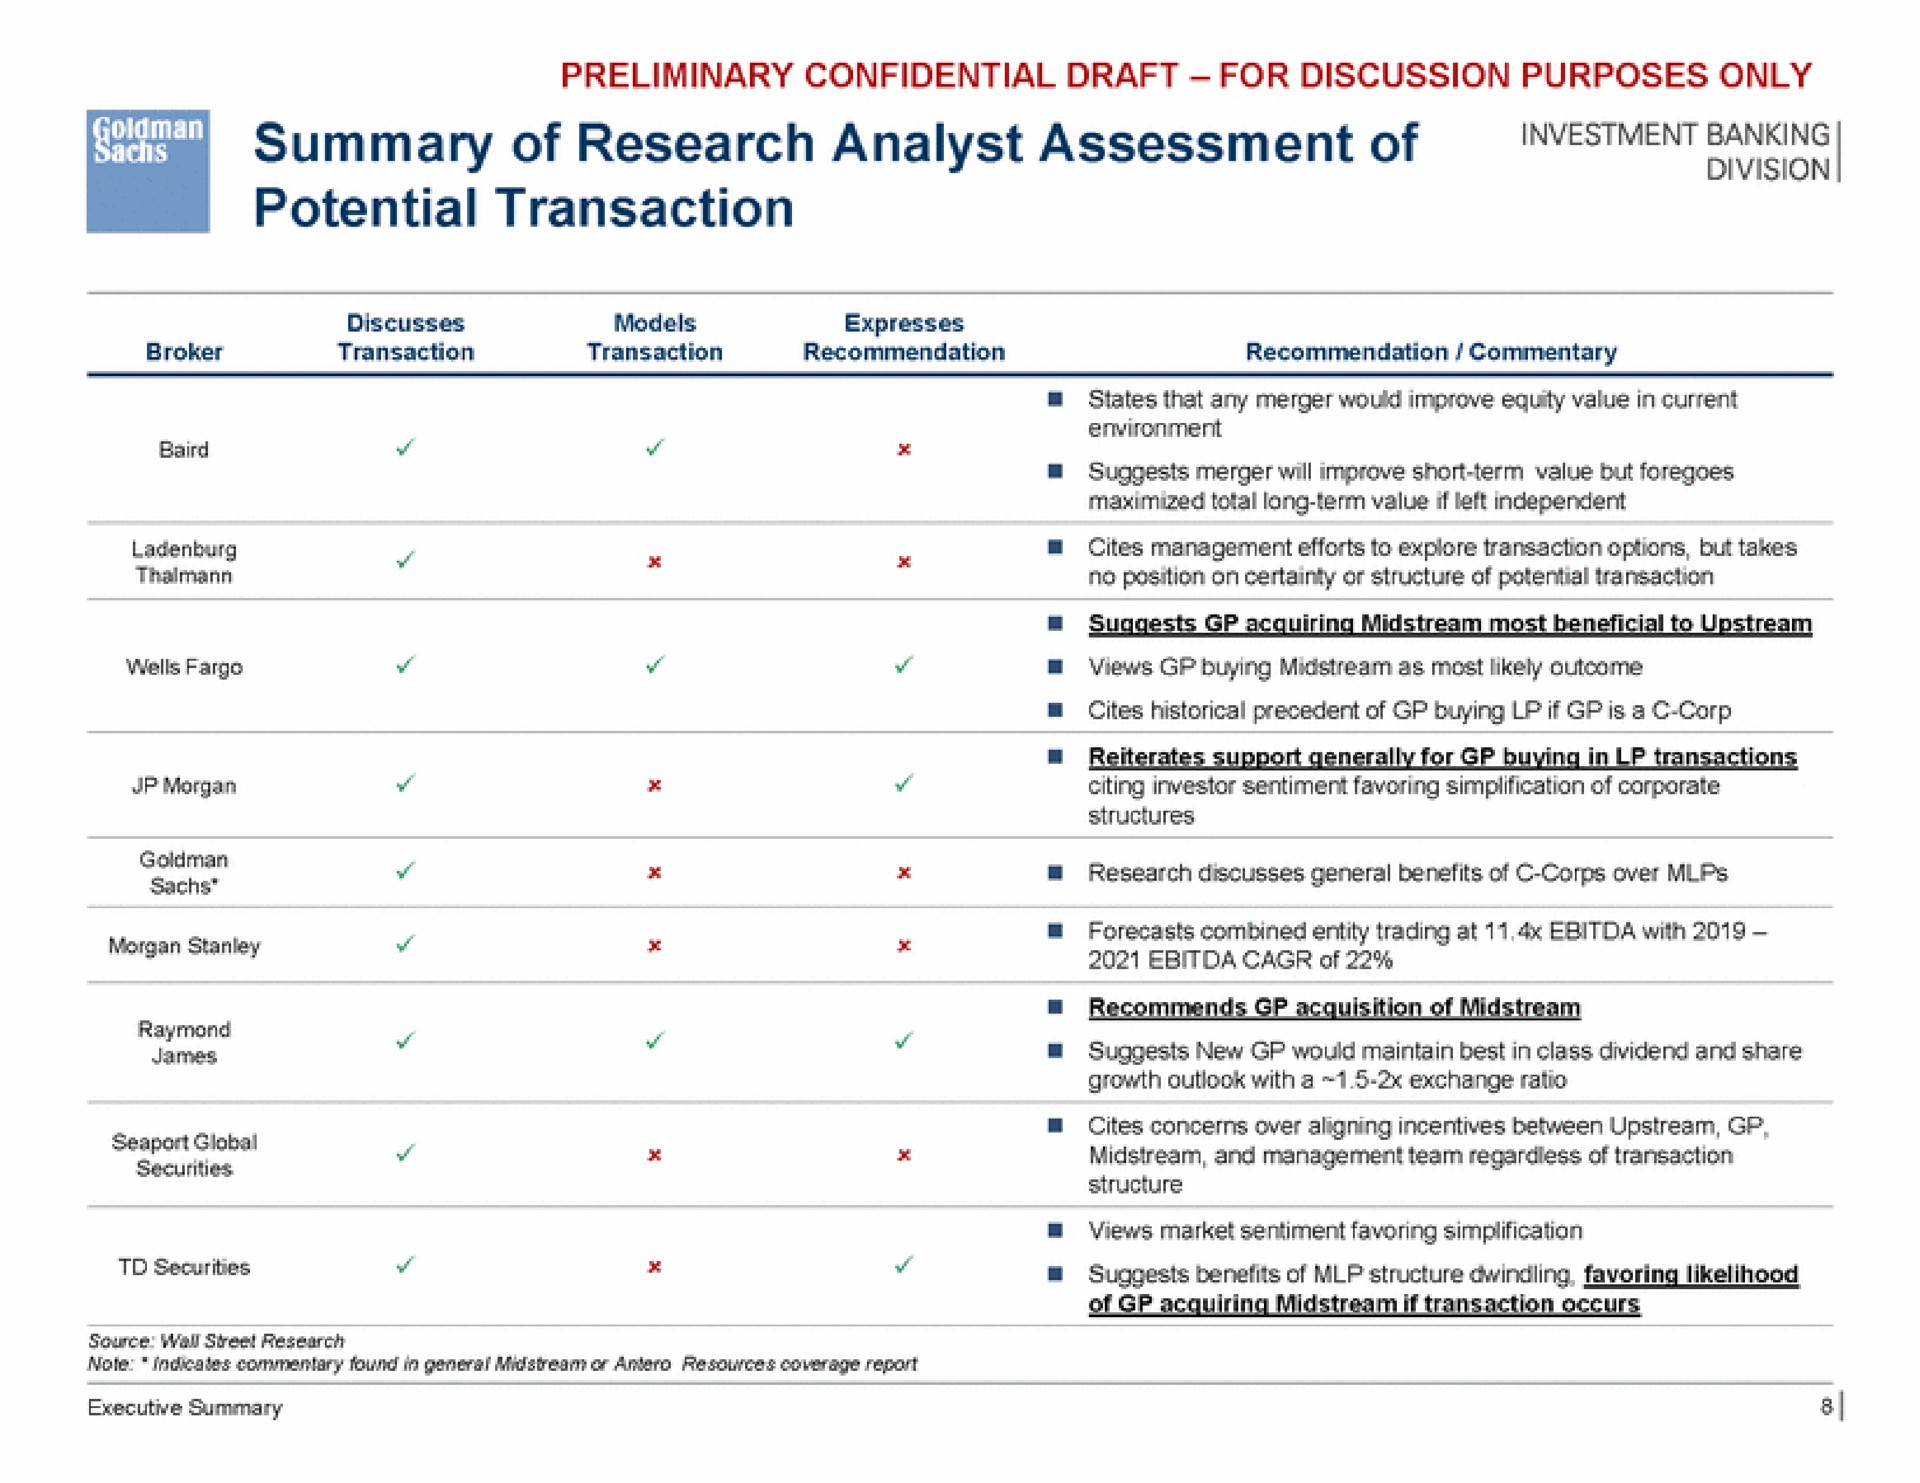 summary of research analyst assessment of potential transaction | Goldman Sachs